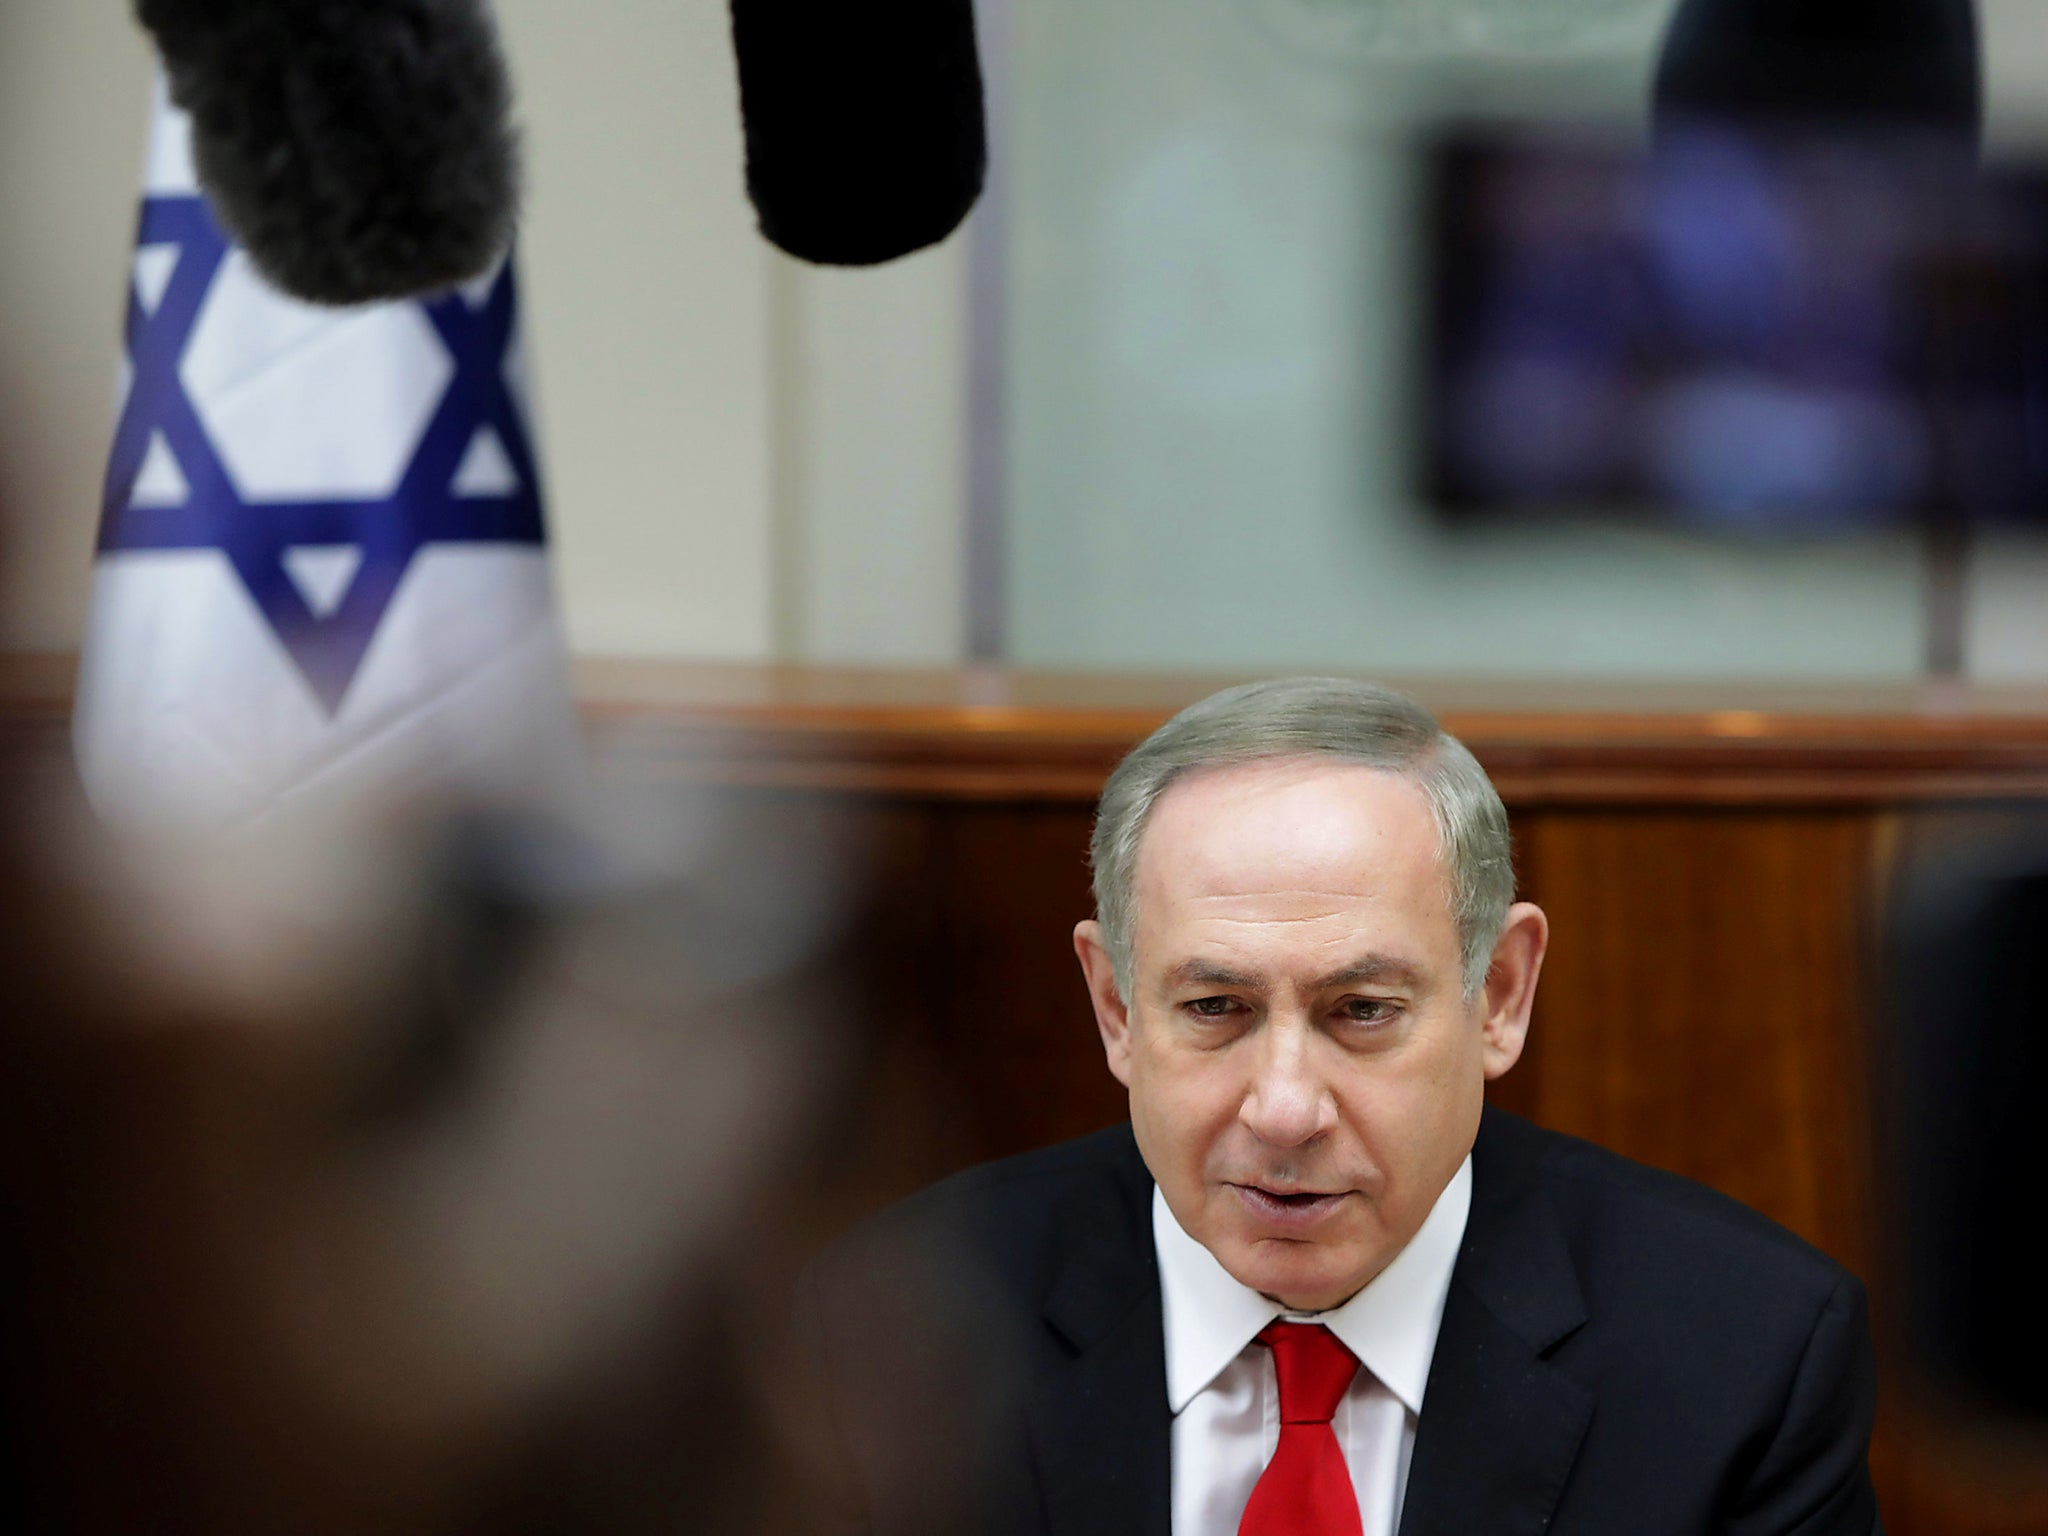 Mr Netanyahu has consistently denied all allegations of wrongdoing